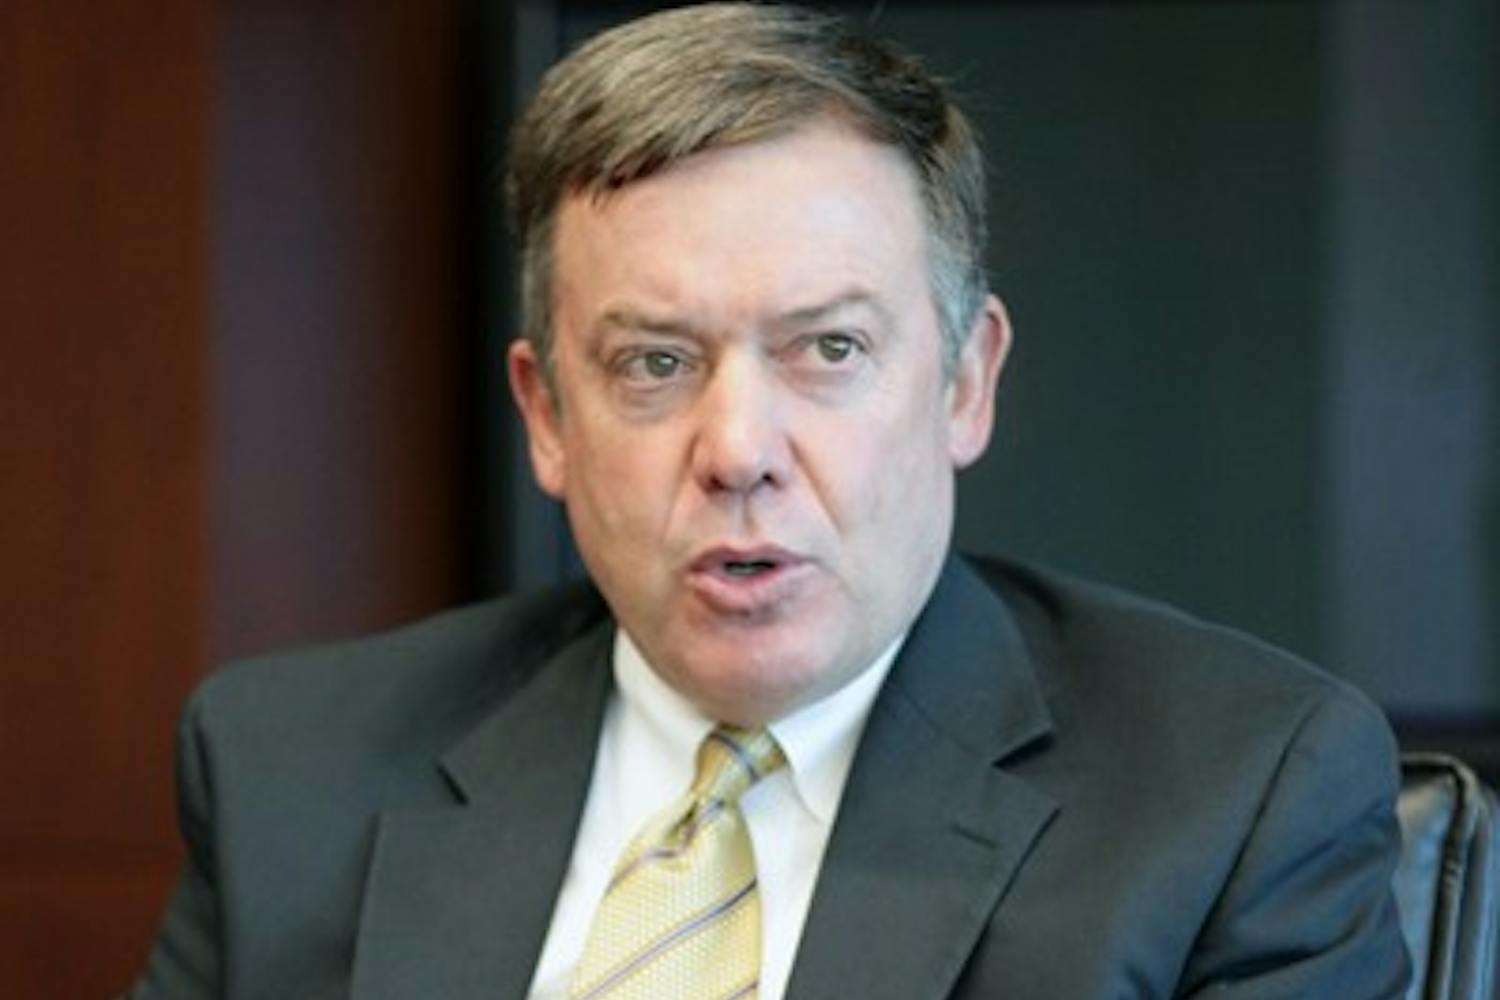 University President Michael Crow speaks to The State Press editorial board Oct. 11, 2011. President Crow recently released proposed tuition increase percentages. (Photo by Beth Easterbrook)